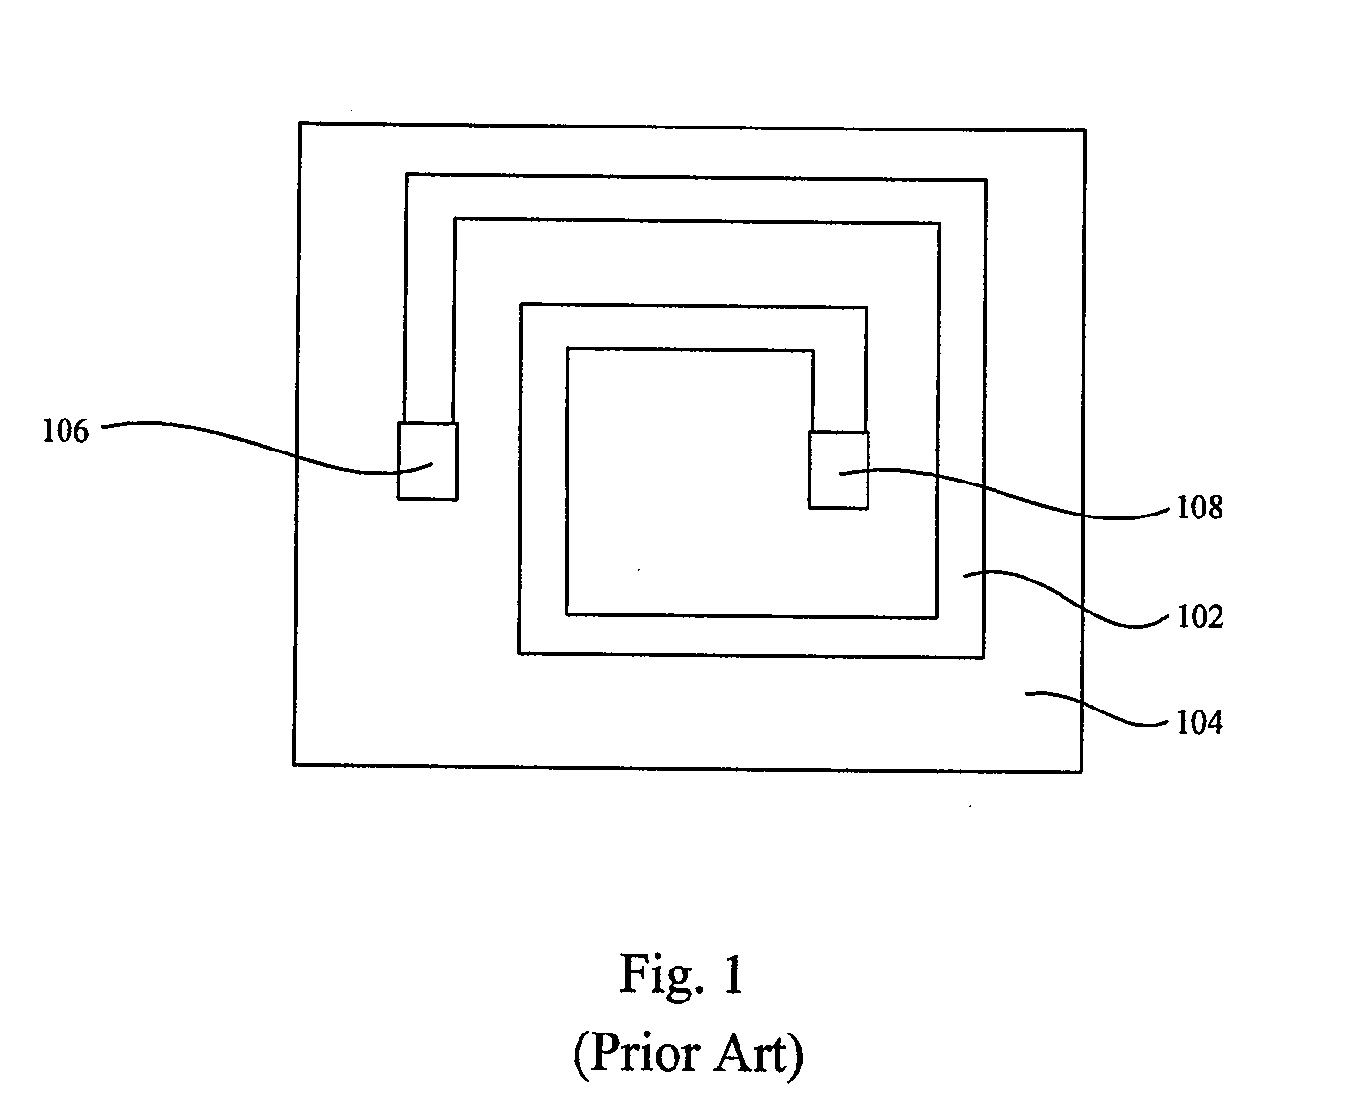 Method of Manufacturing a Coil Inductor